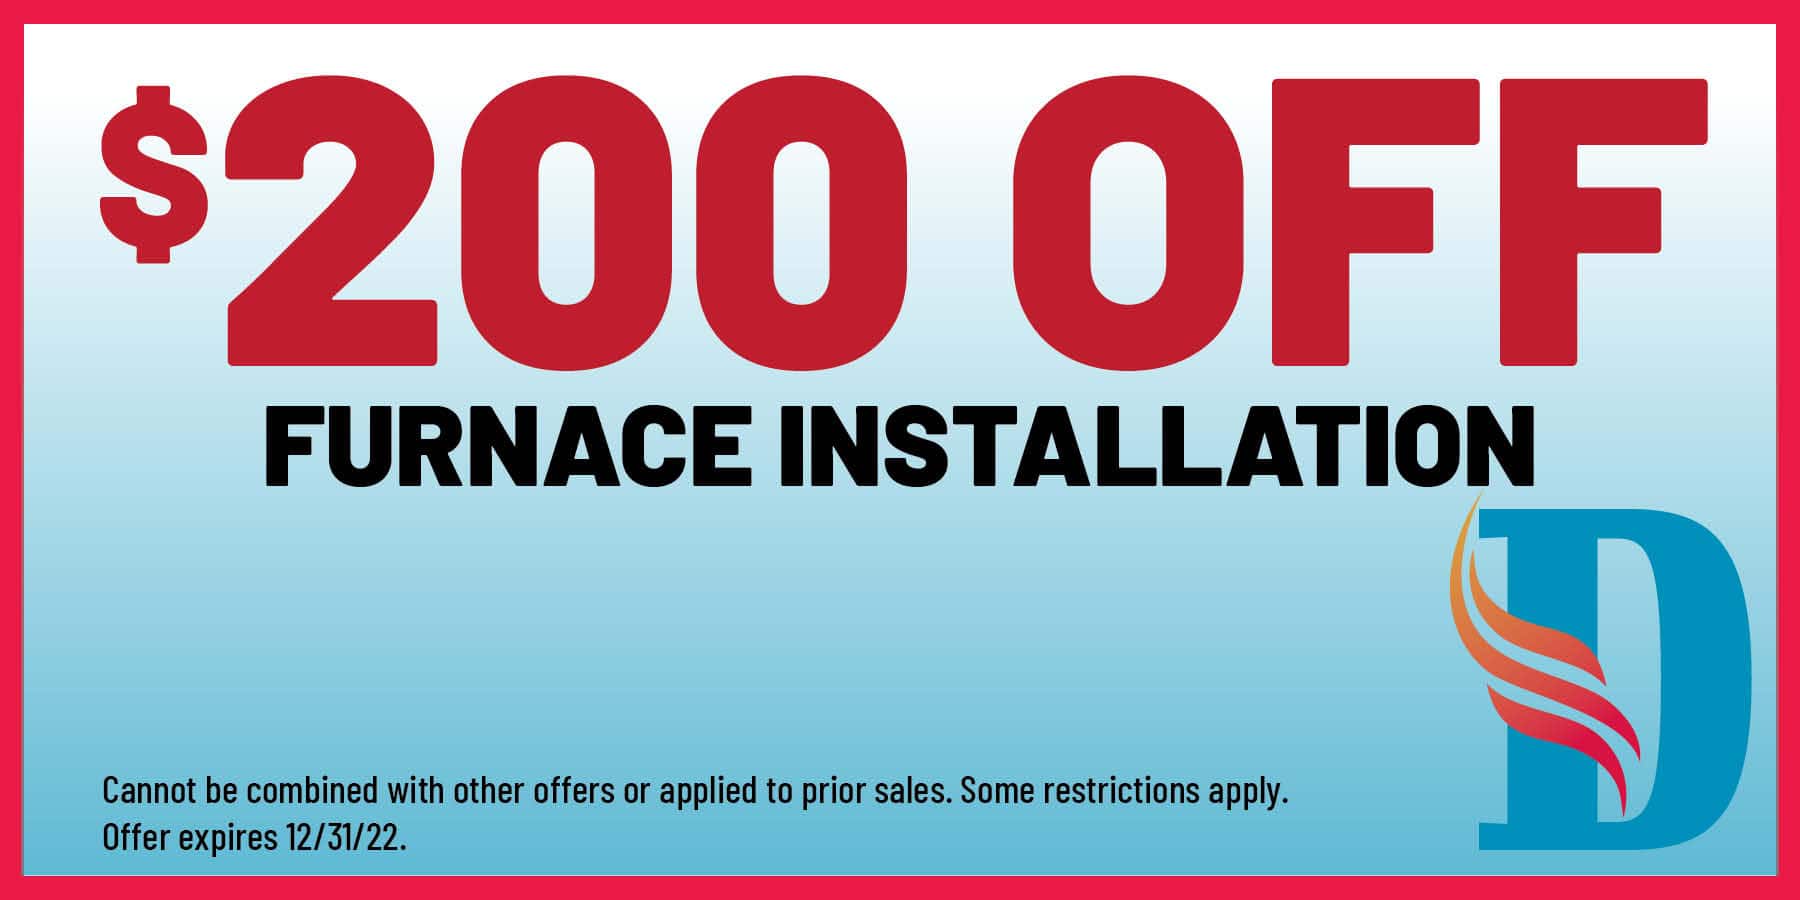 0 off furnace installation coupon.